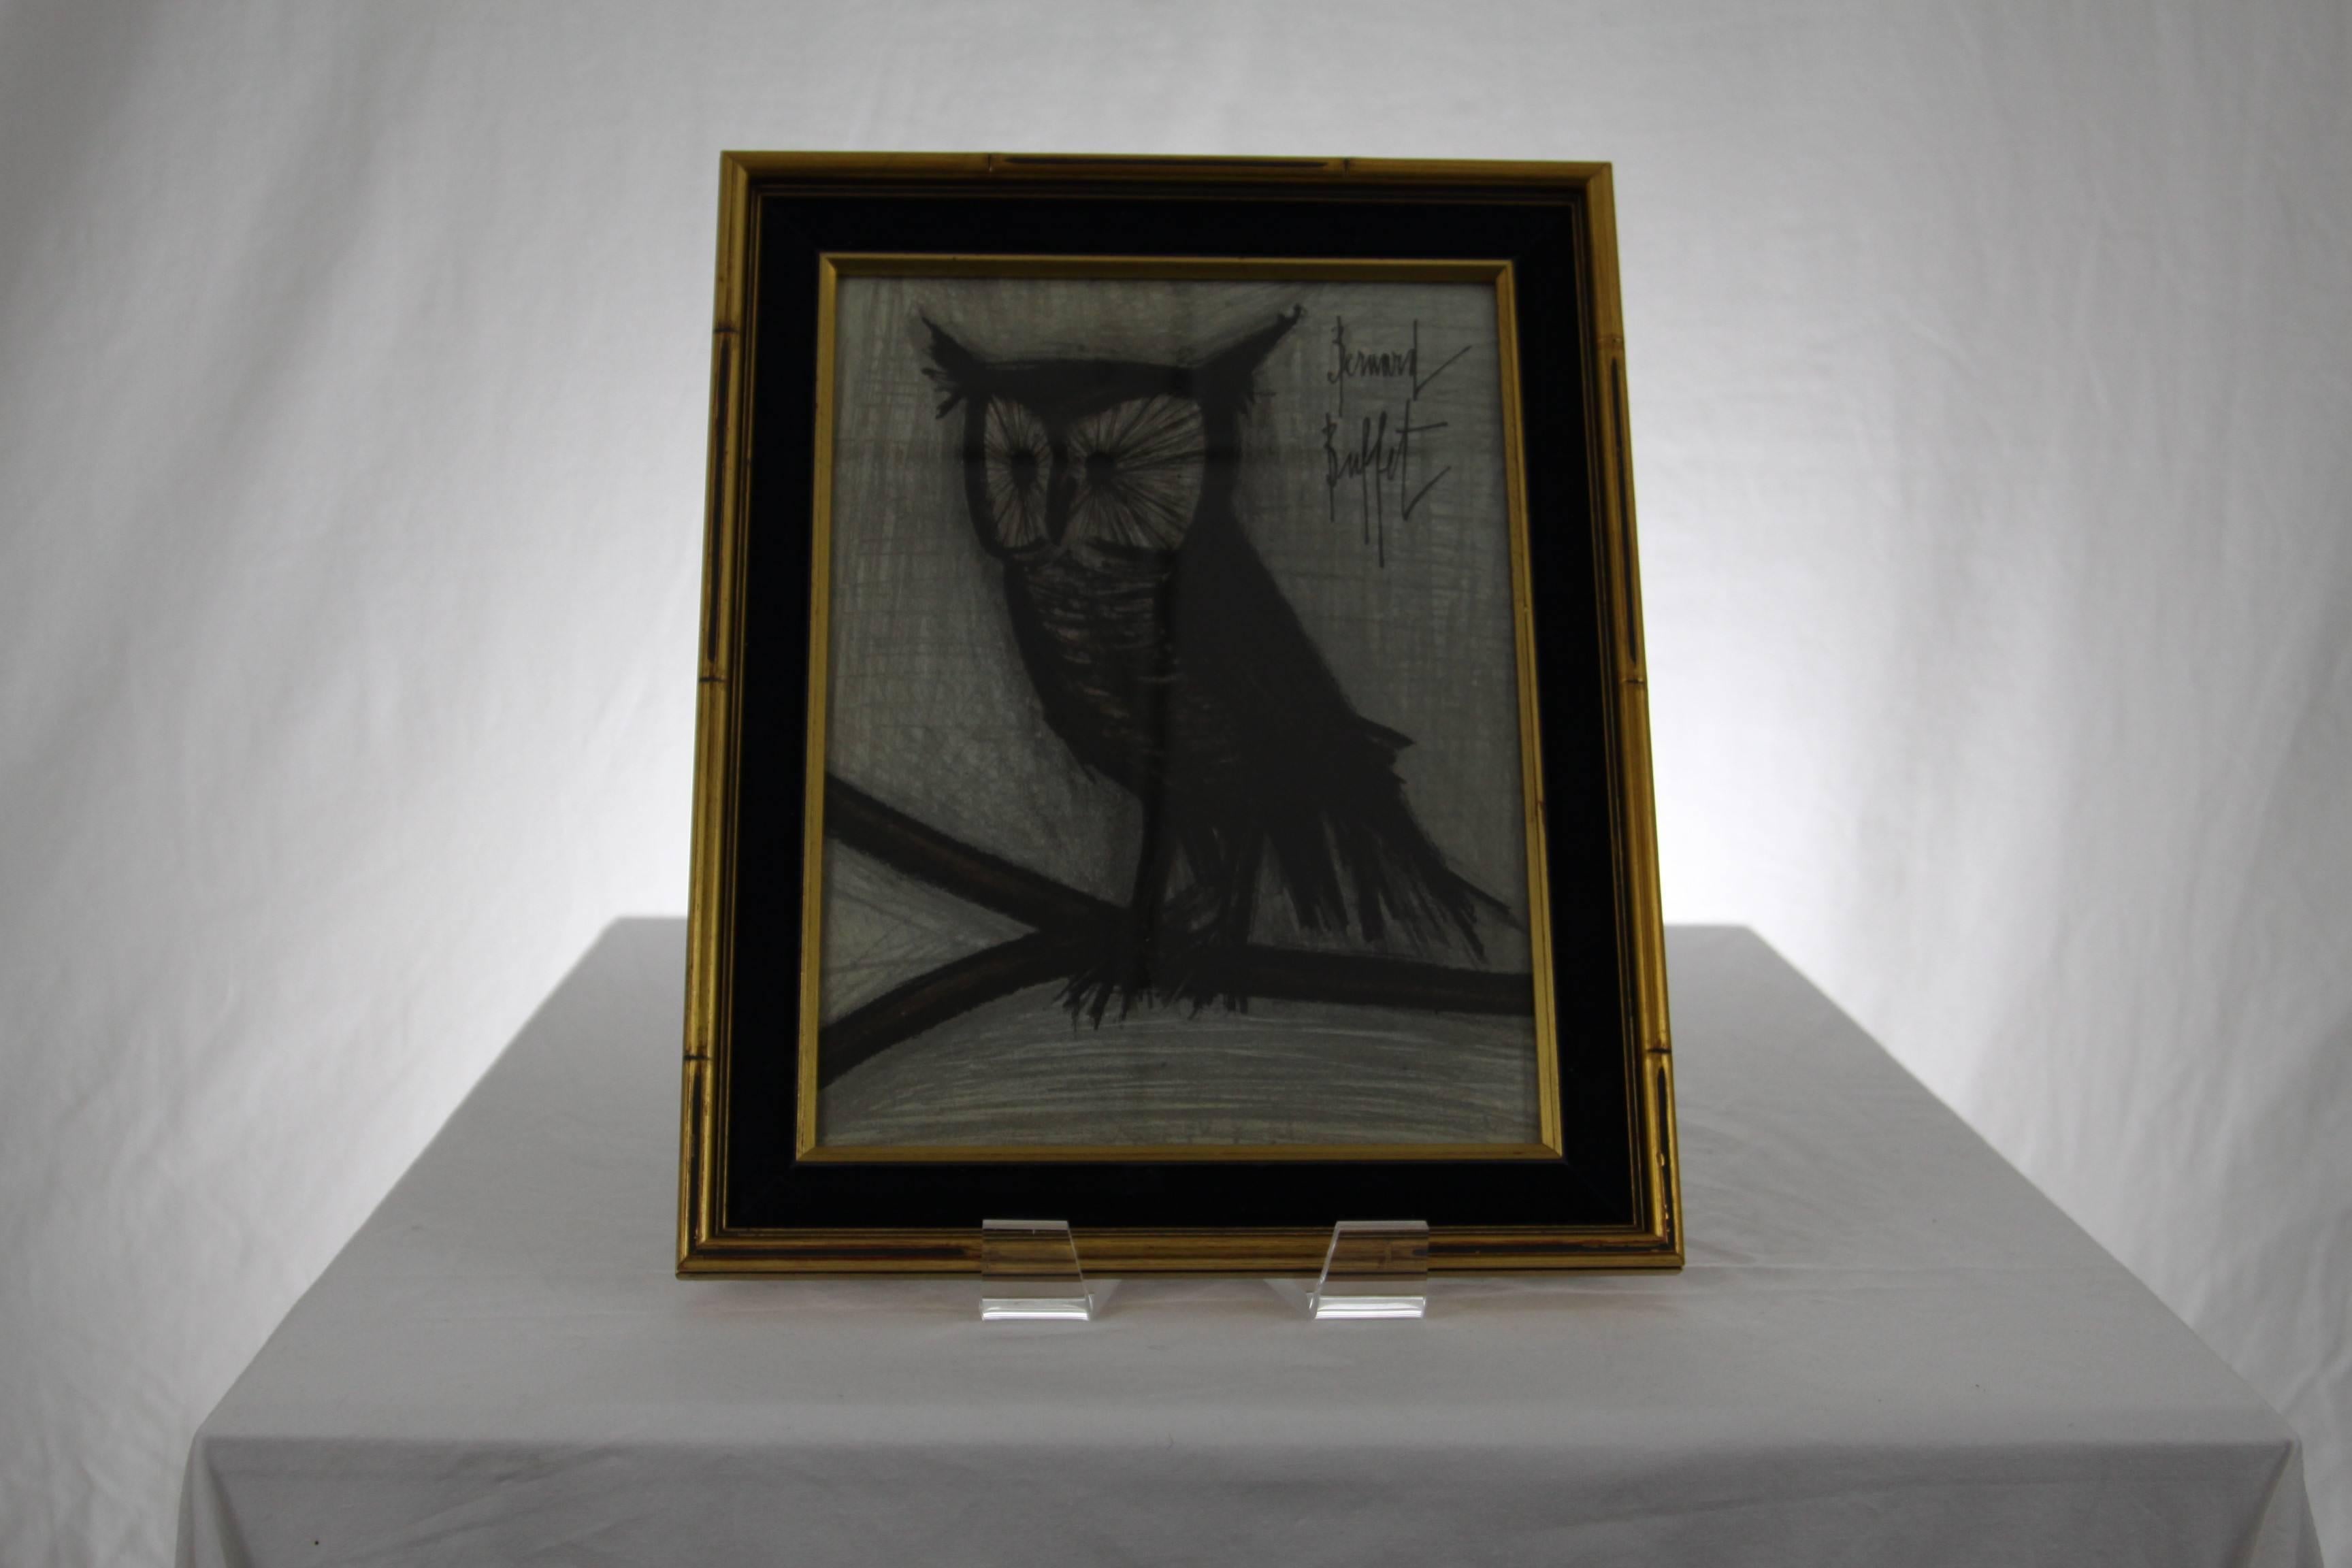 This original lithograph of an owl on a branch is set in a gold faux bamboo frame. Bernard Buffet was born in Paris, France on July 10, 1928. He entered the Ecole des Beaux Arts in 1944 but worked mostly in solitude. He obtained an exhibition at the